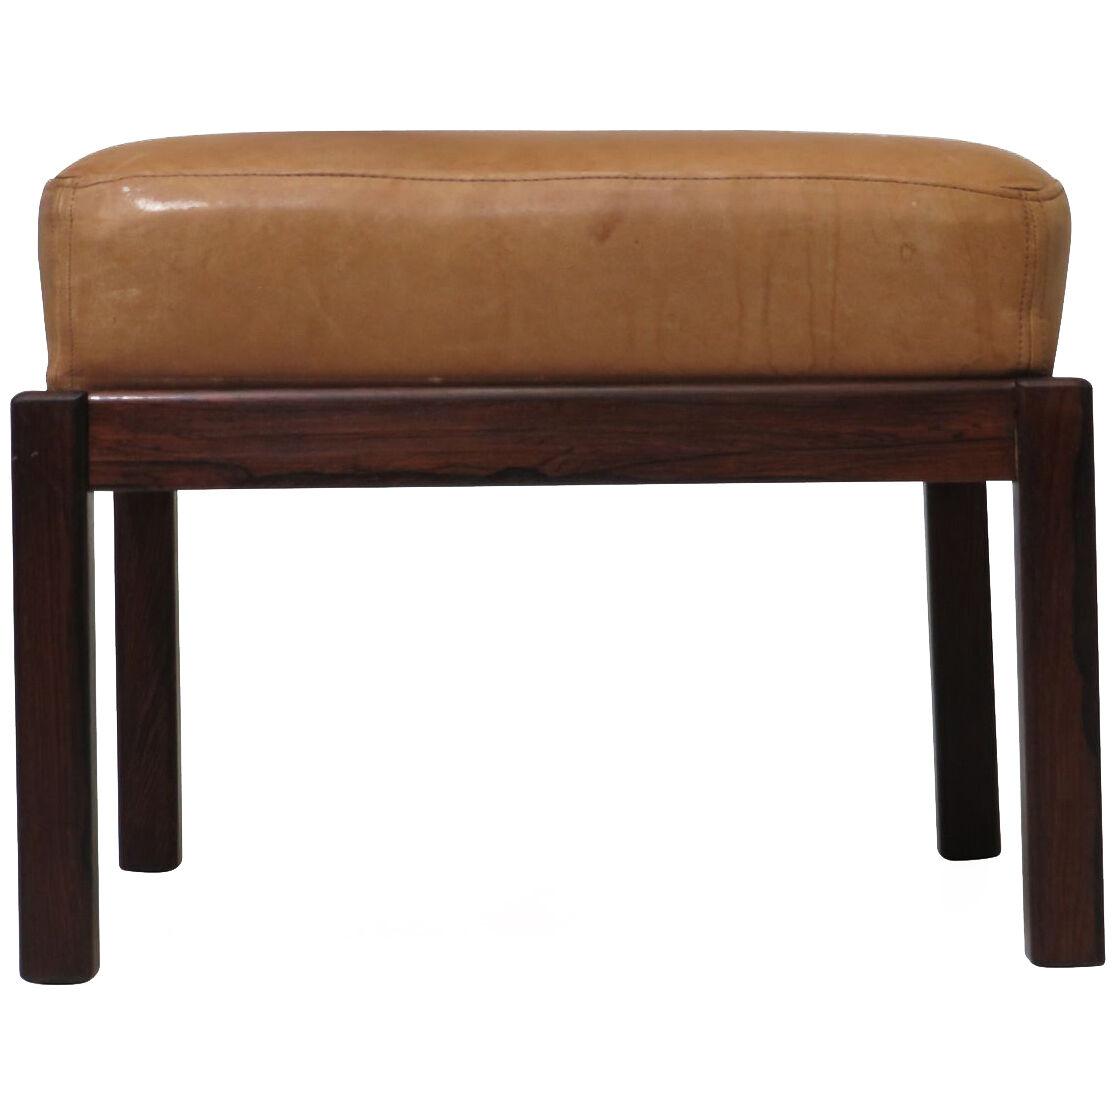 Rosewood Ottoman Bench in Leather